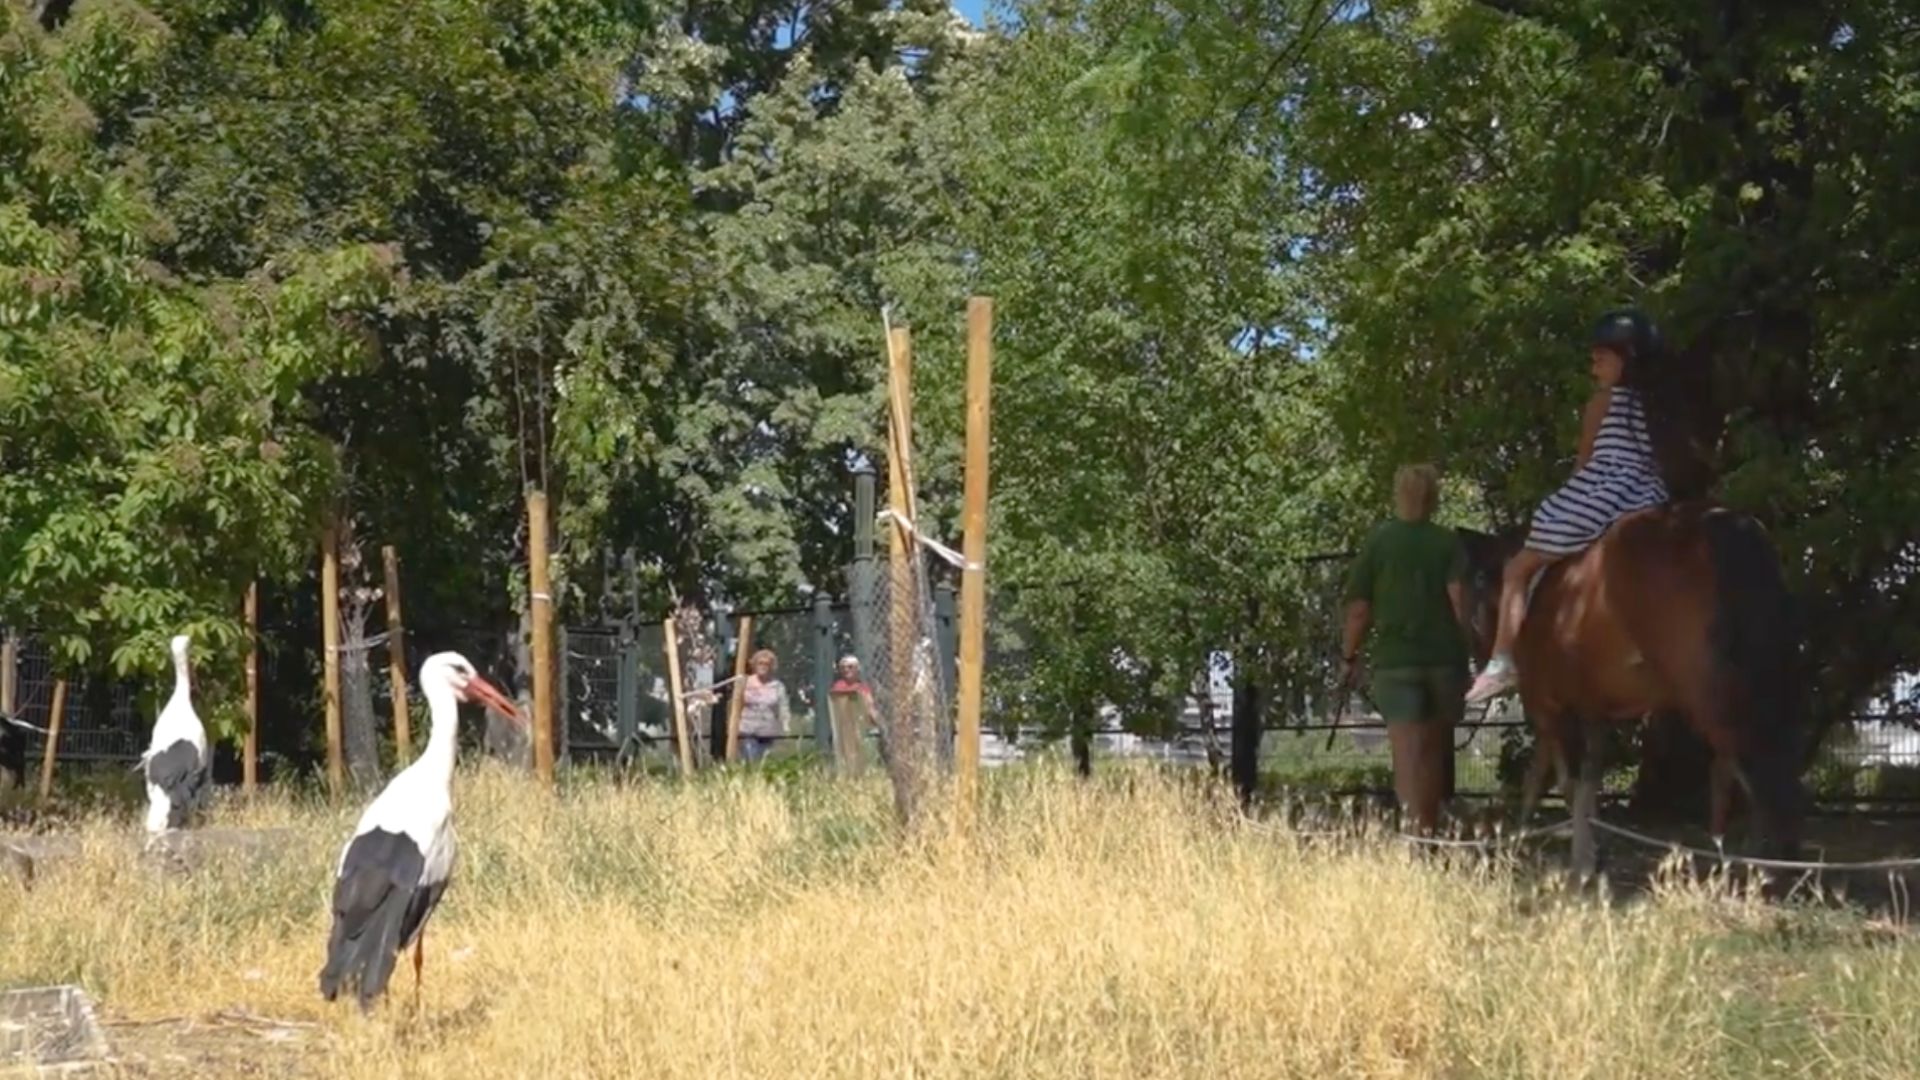 Storks standing in a grassy area with people walking and a child riding a horse in the background at the petting zoo on Margaret Island in Budapest.